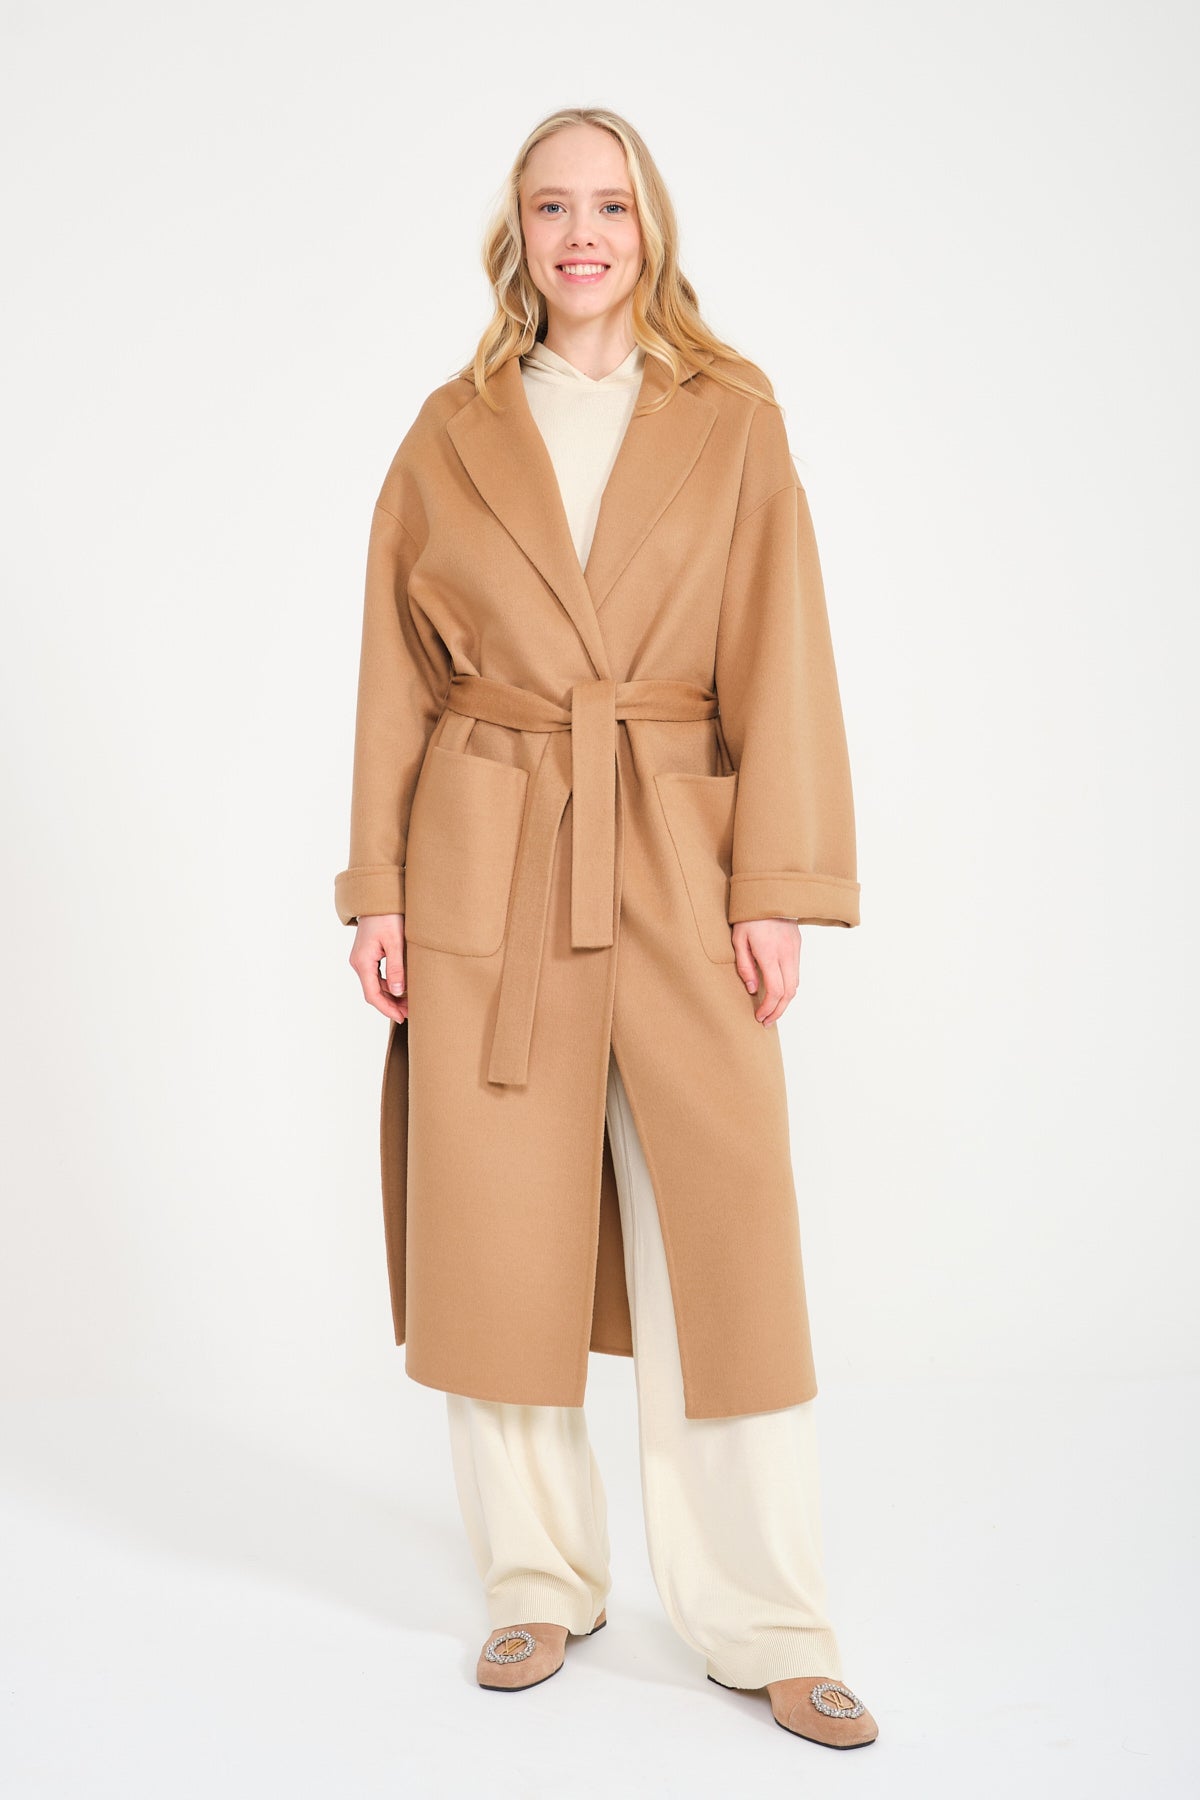 Buy Camel Belted Long Coat from Next France